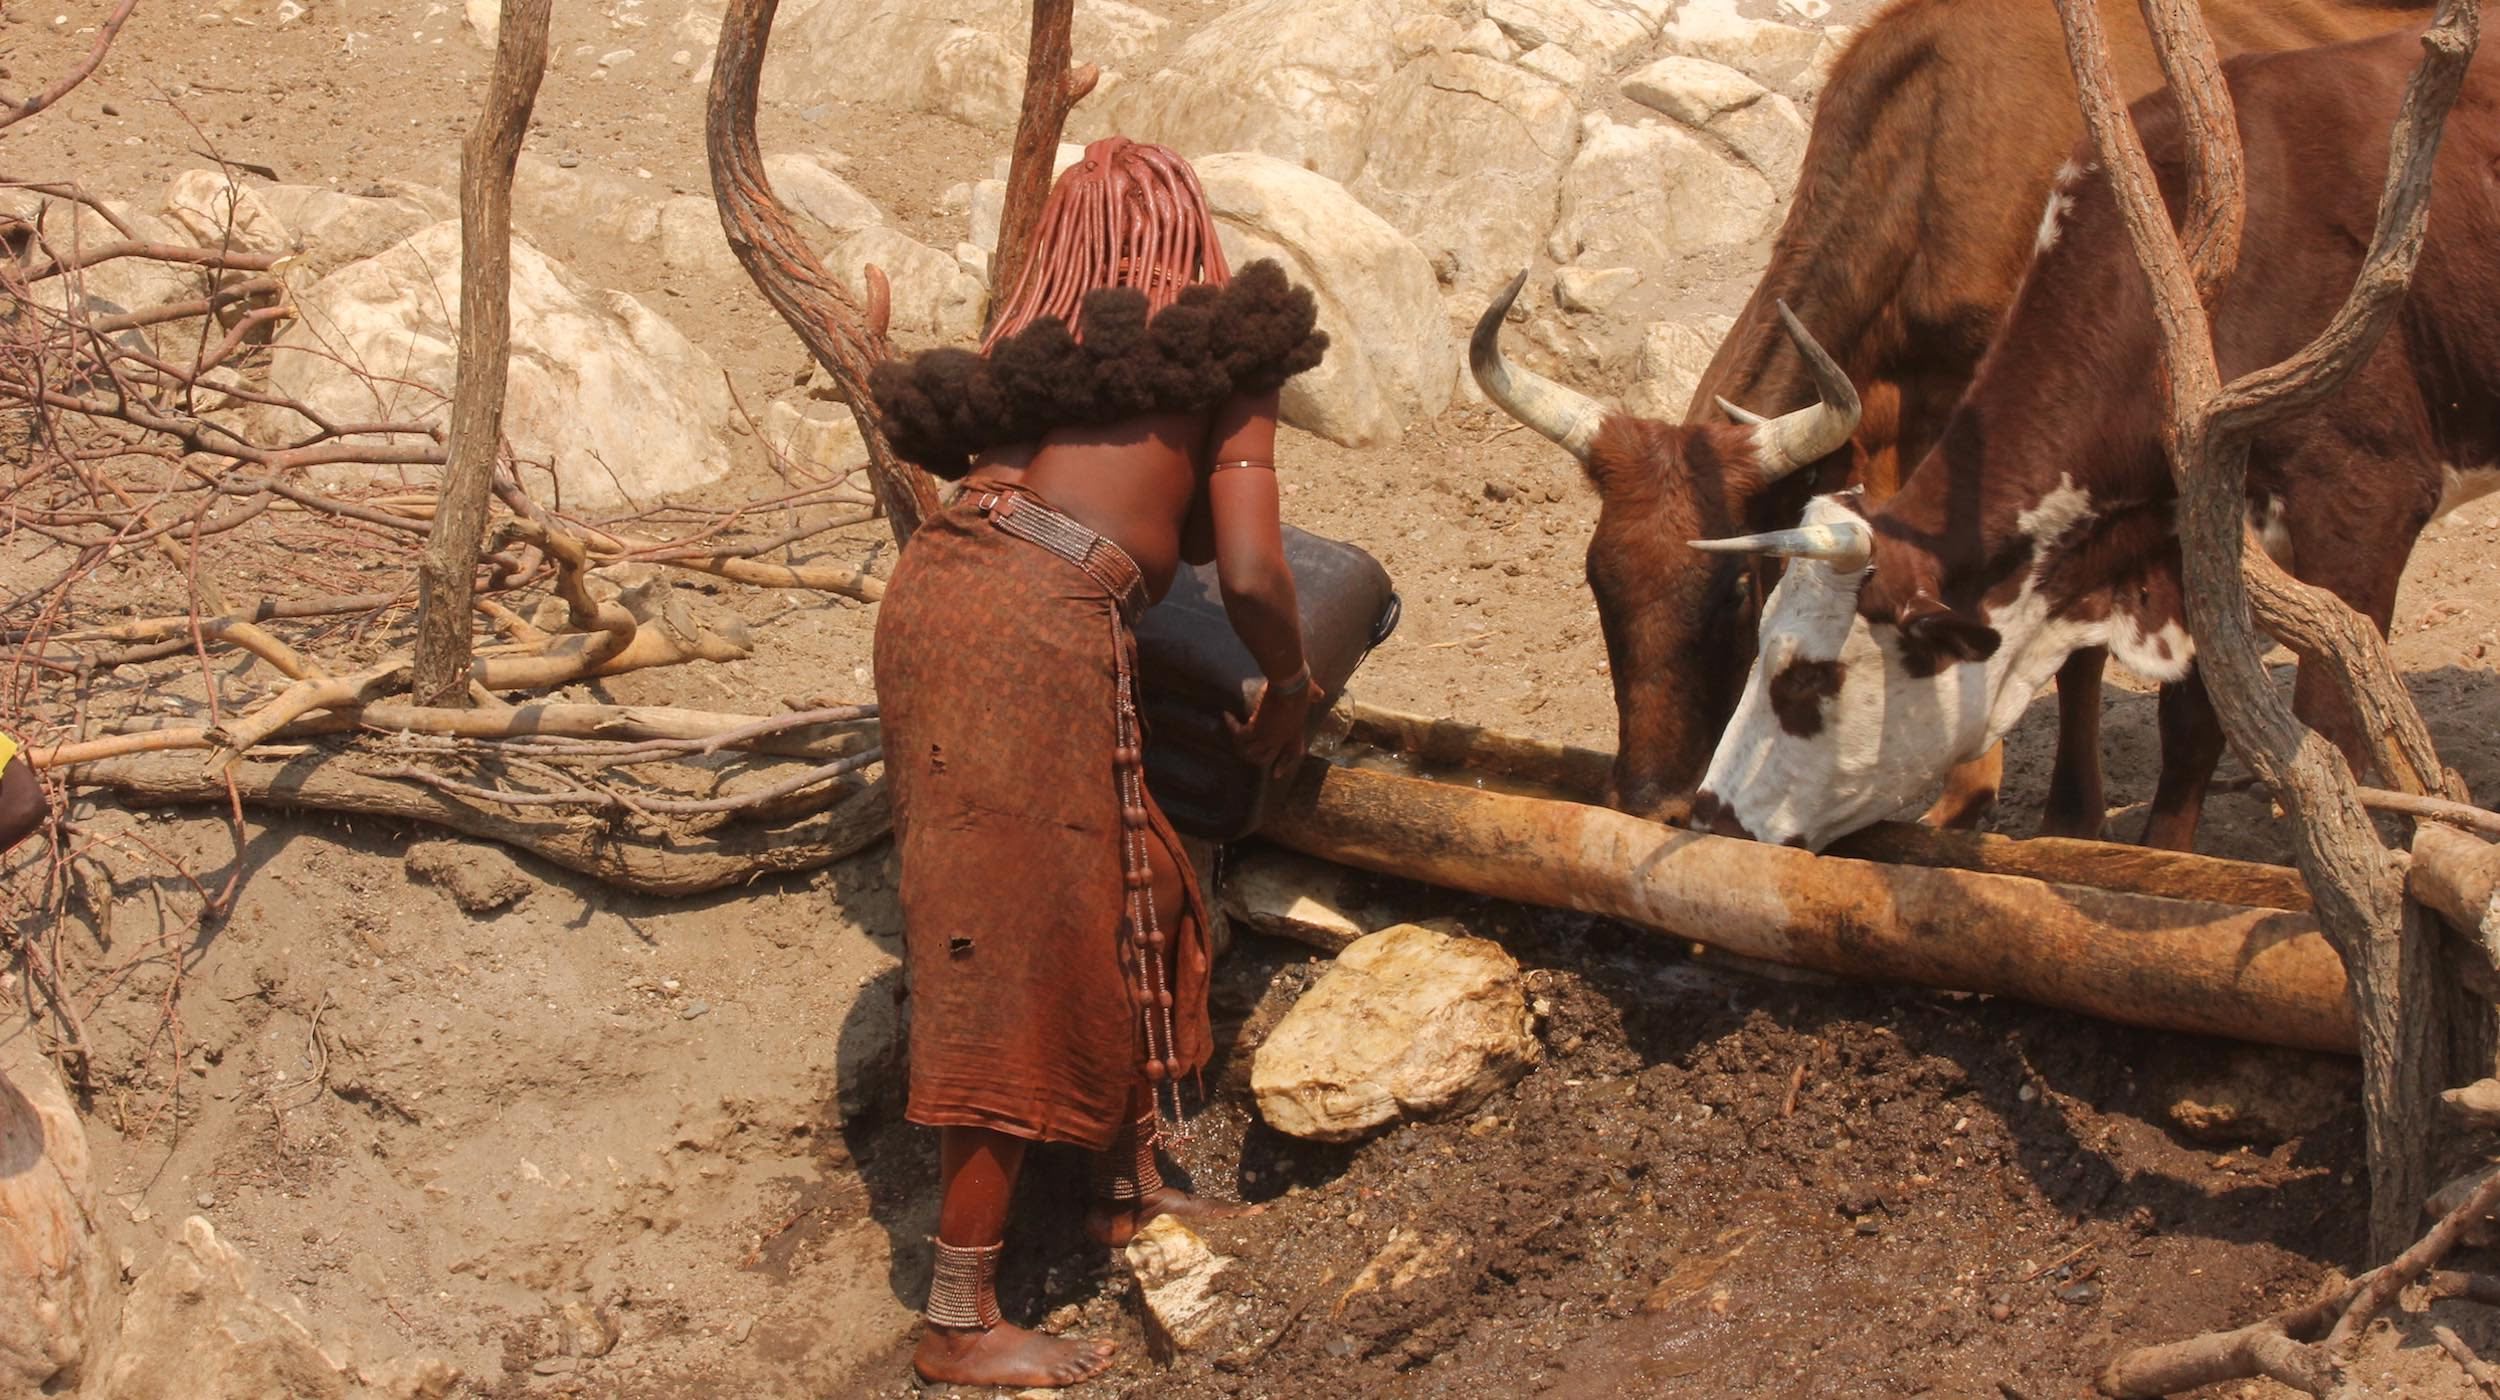 A Himba woman pours water into a cattle trough.